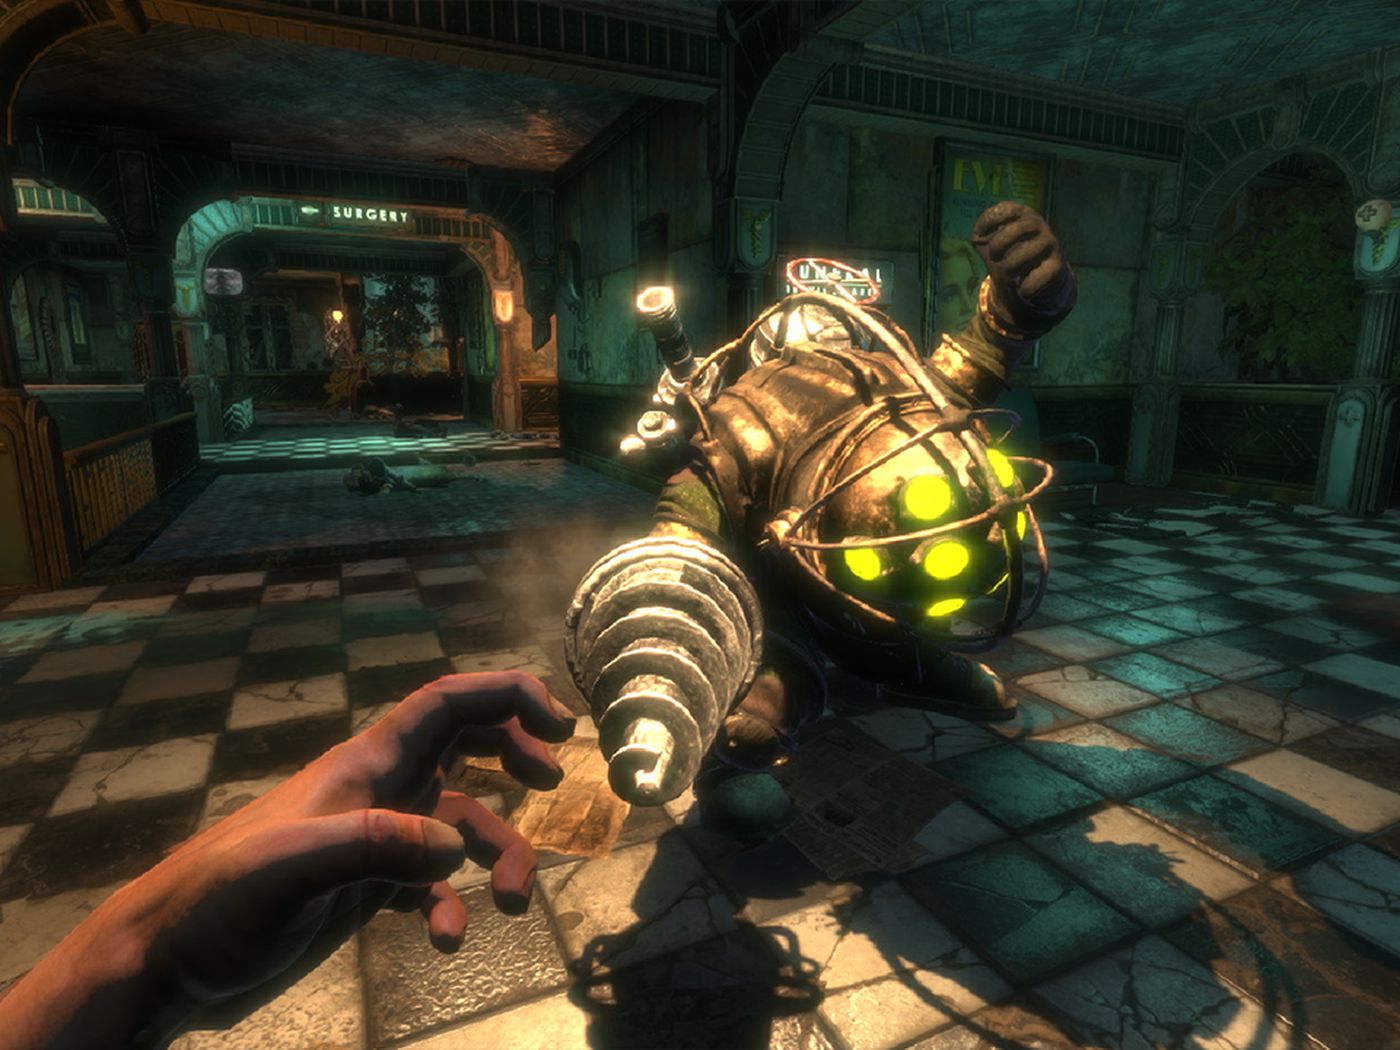 bioshock-4-might-be-delayed-after-reported-issues-gameranx